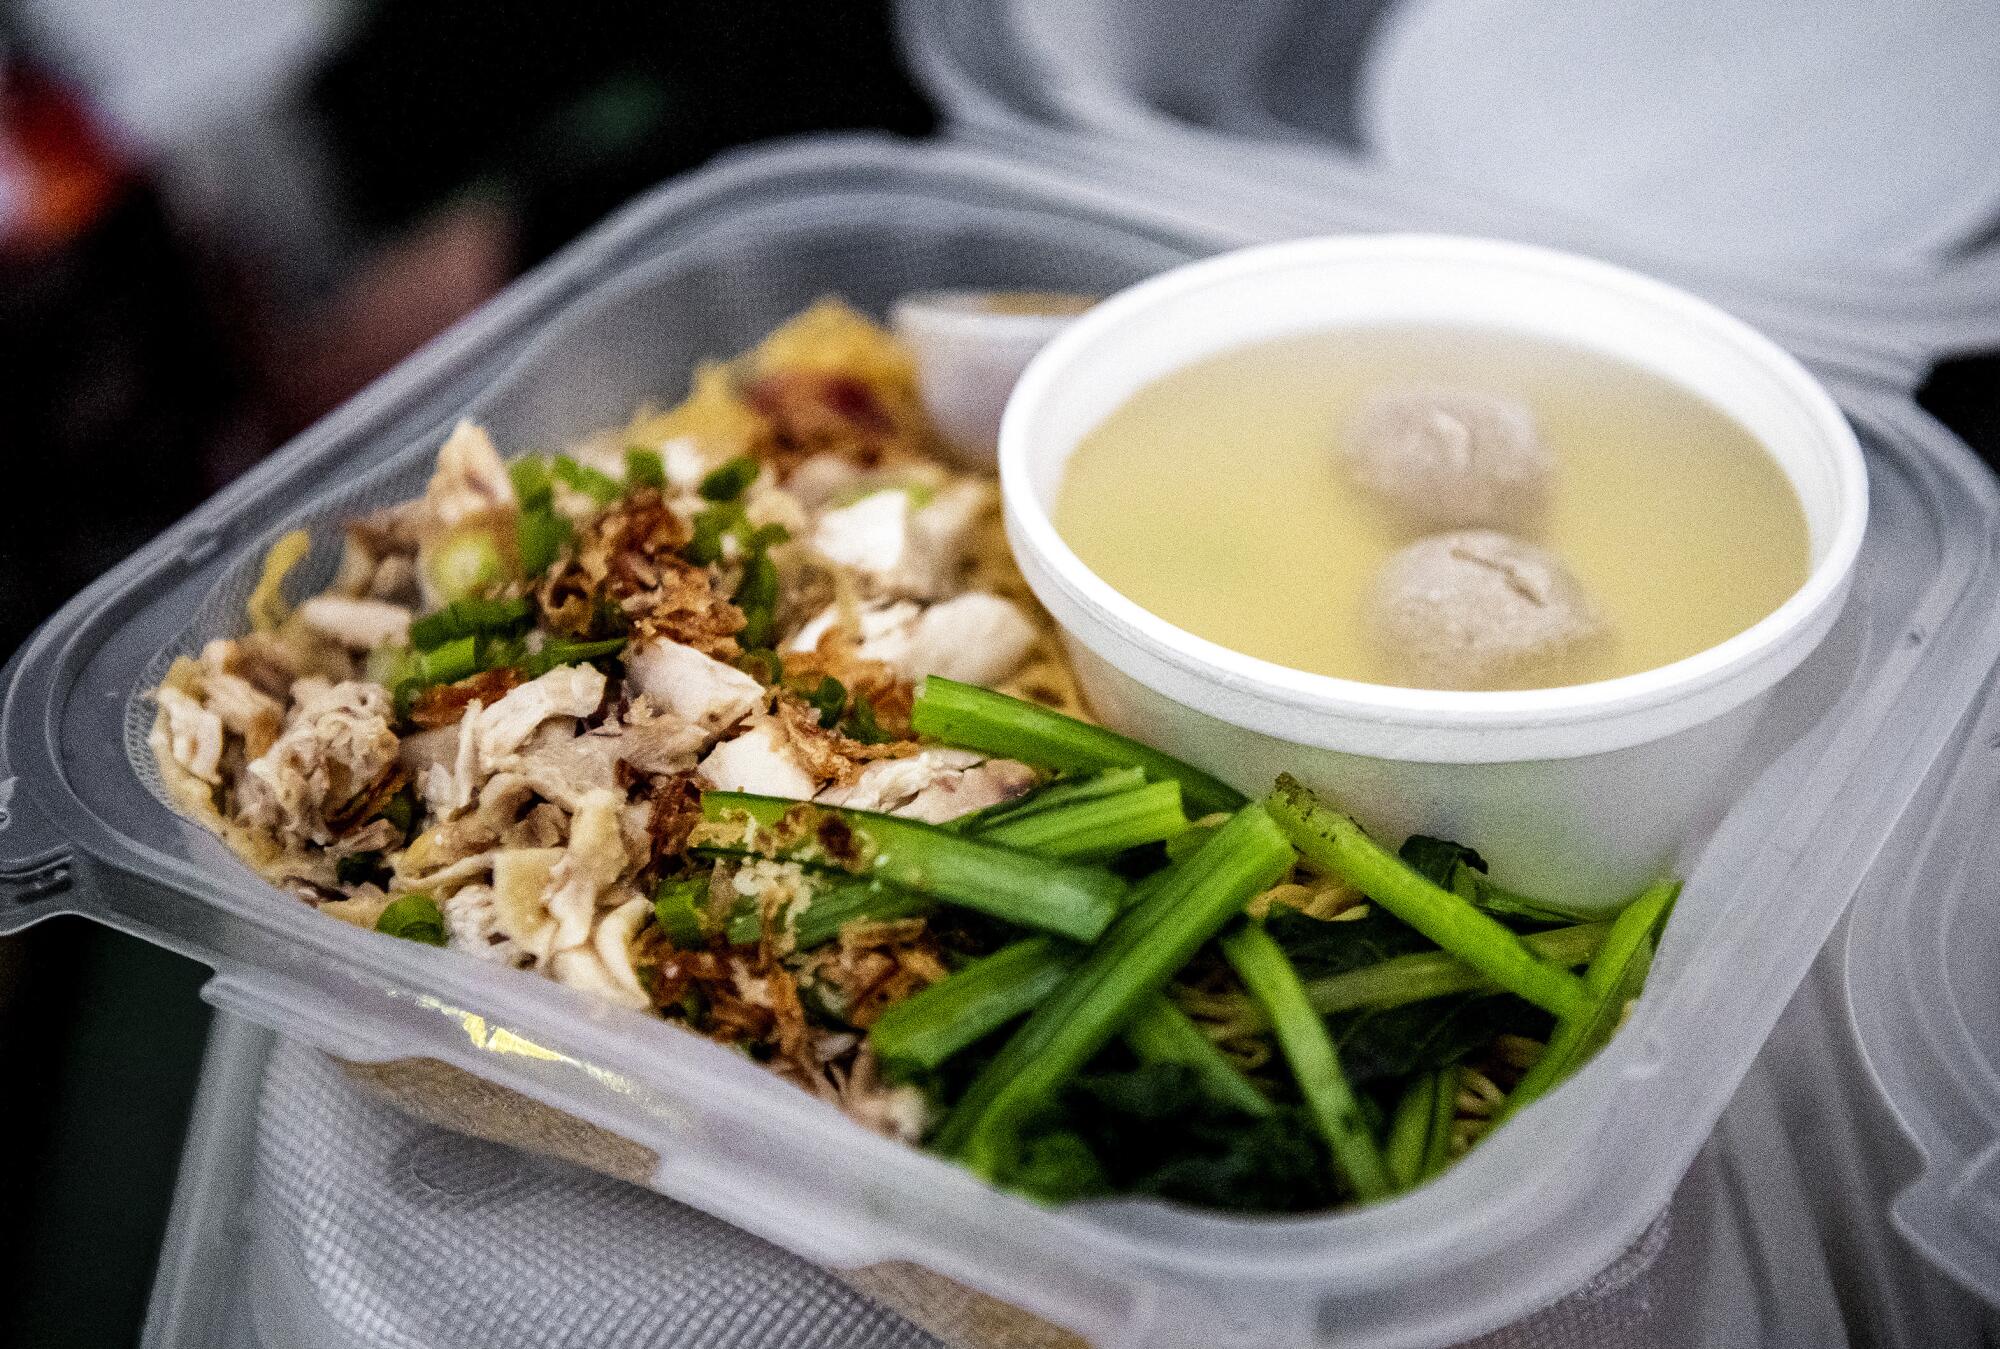 Bakmi Ayam Kampung, served by members of the church, "Favor of God", during the Christmas bazaar.